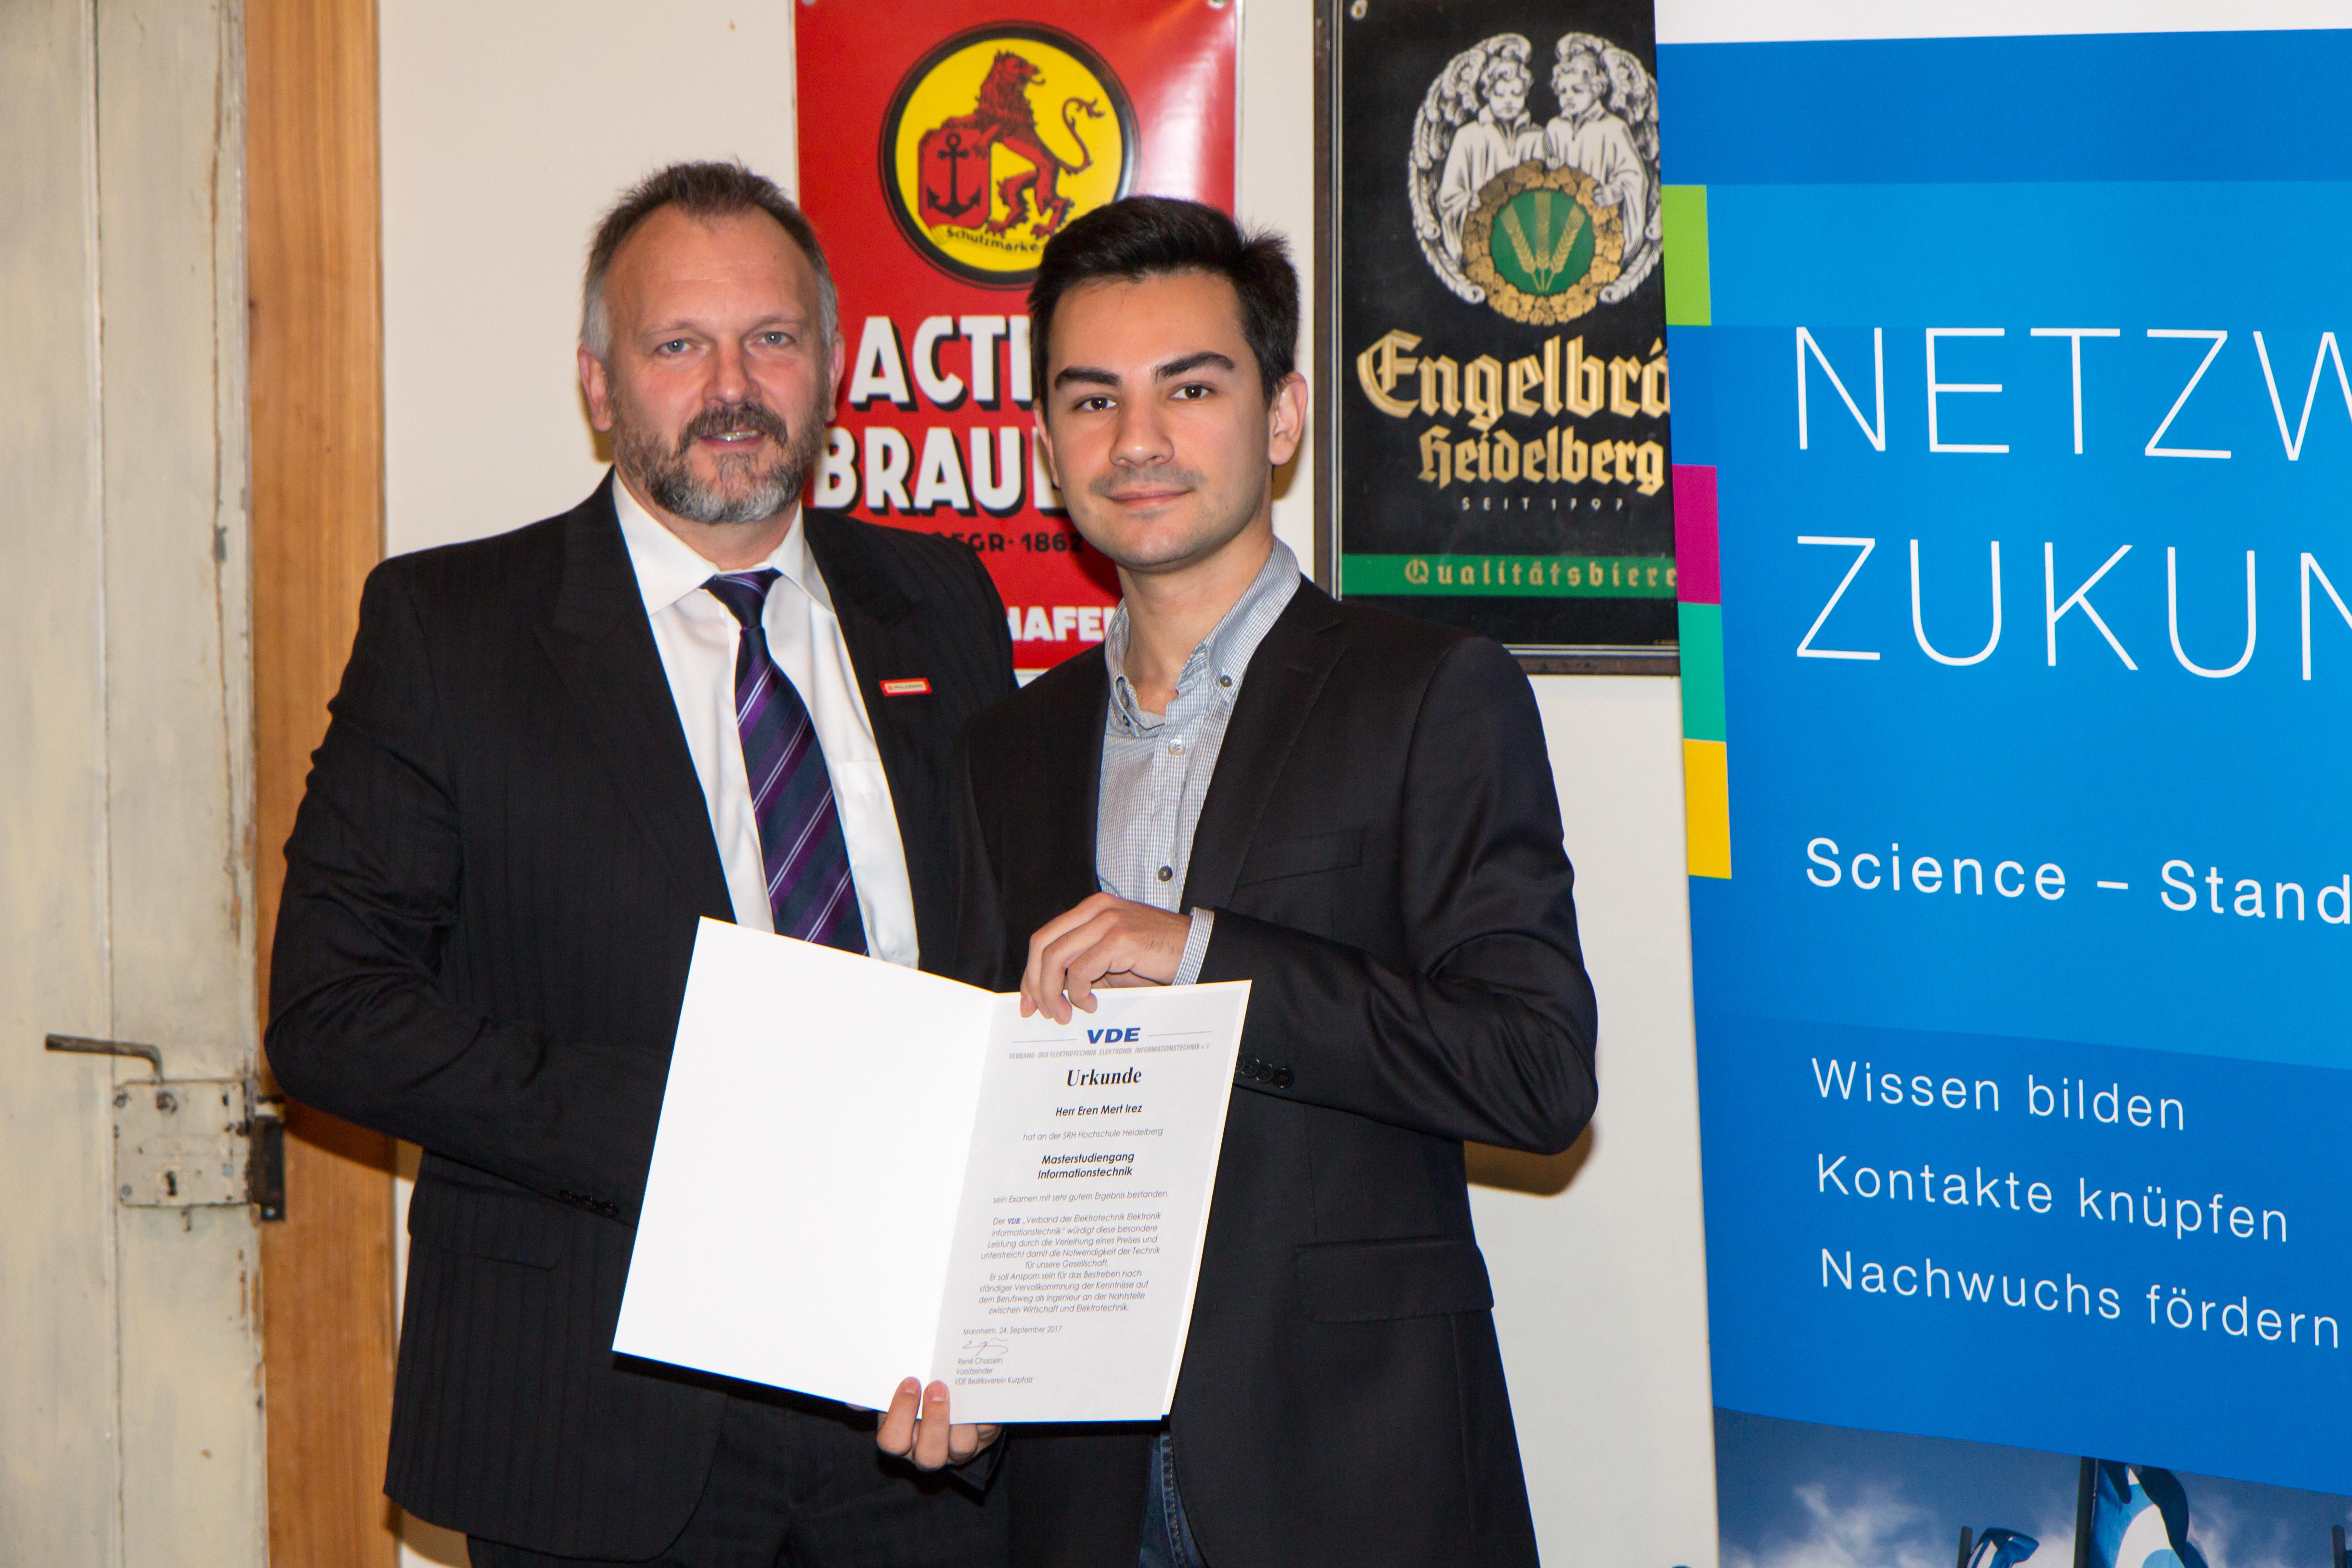 Eren Mert İrez, a Graduate of the Department of Electrical and Electronic Engineering of TOBB ETÜ, Was Awarded a Prize by Germany-Based VDE